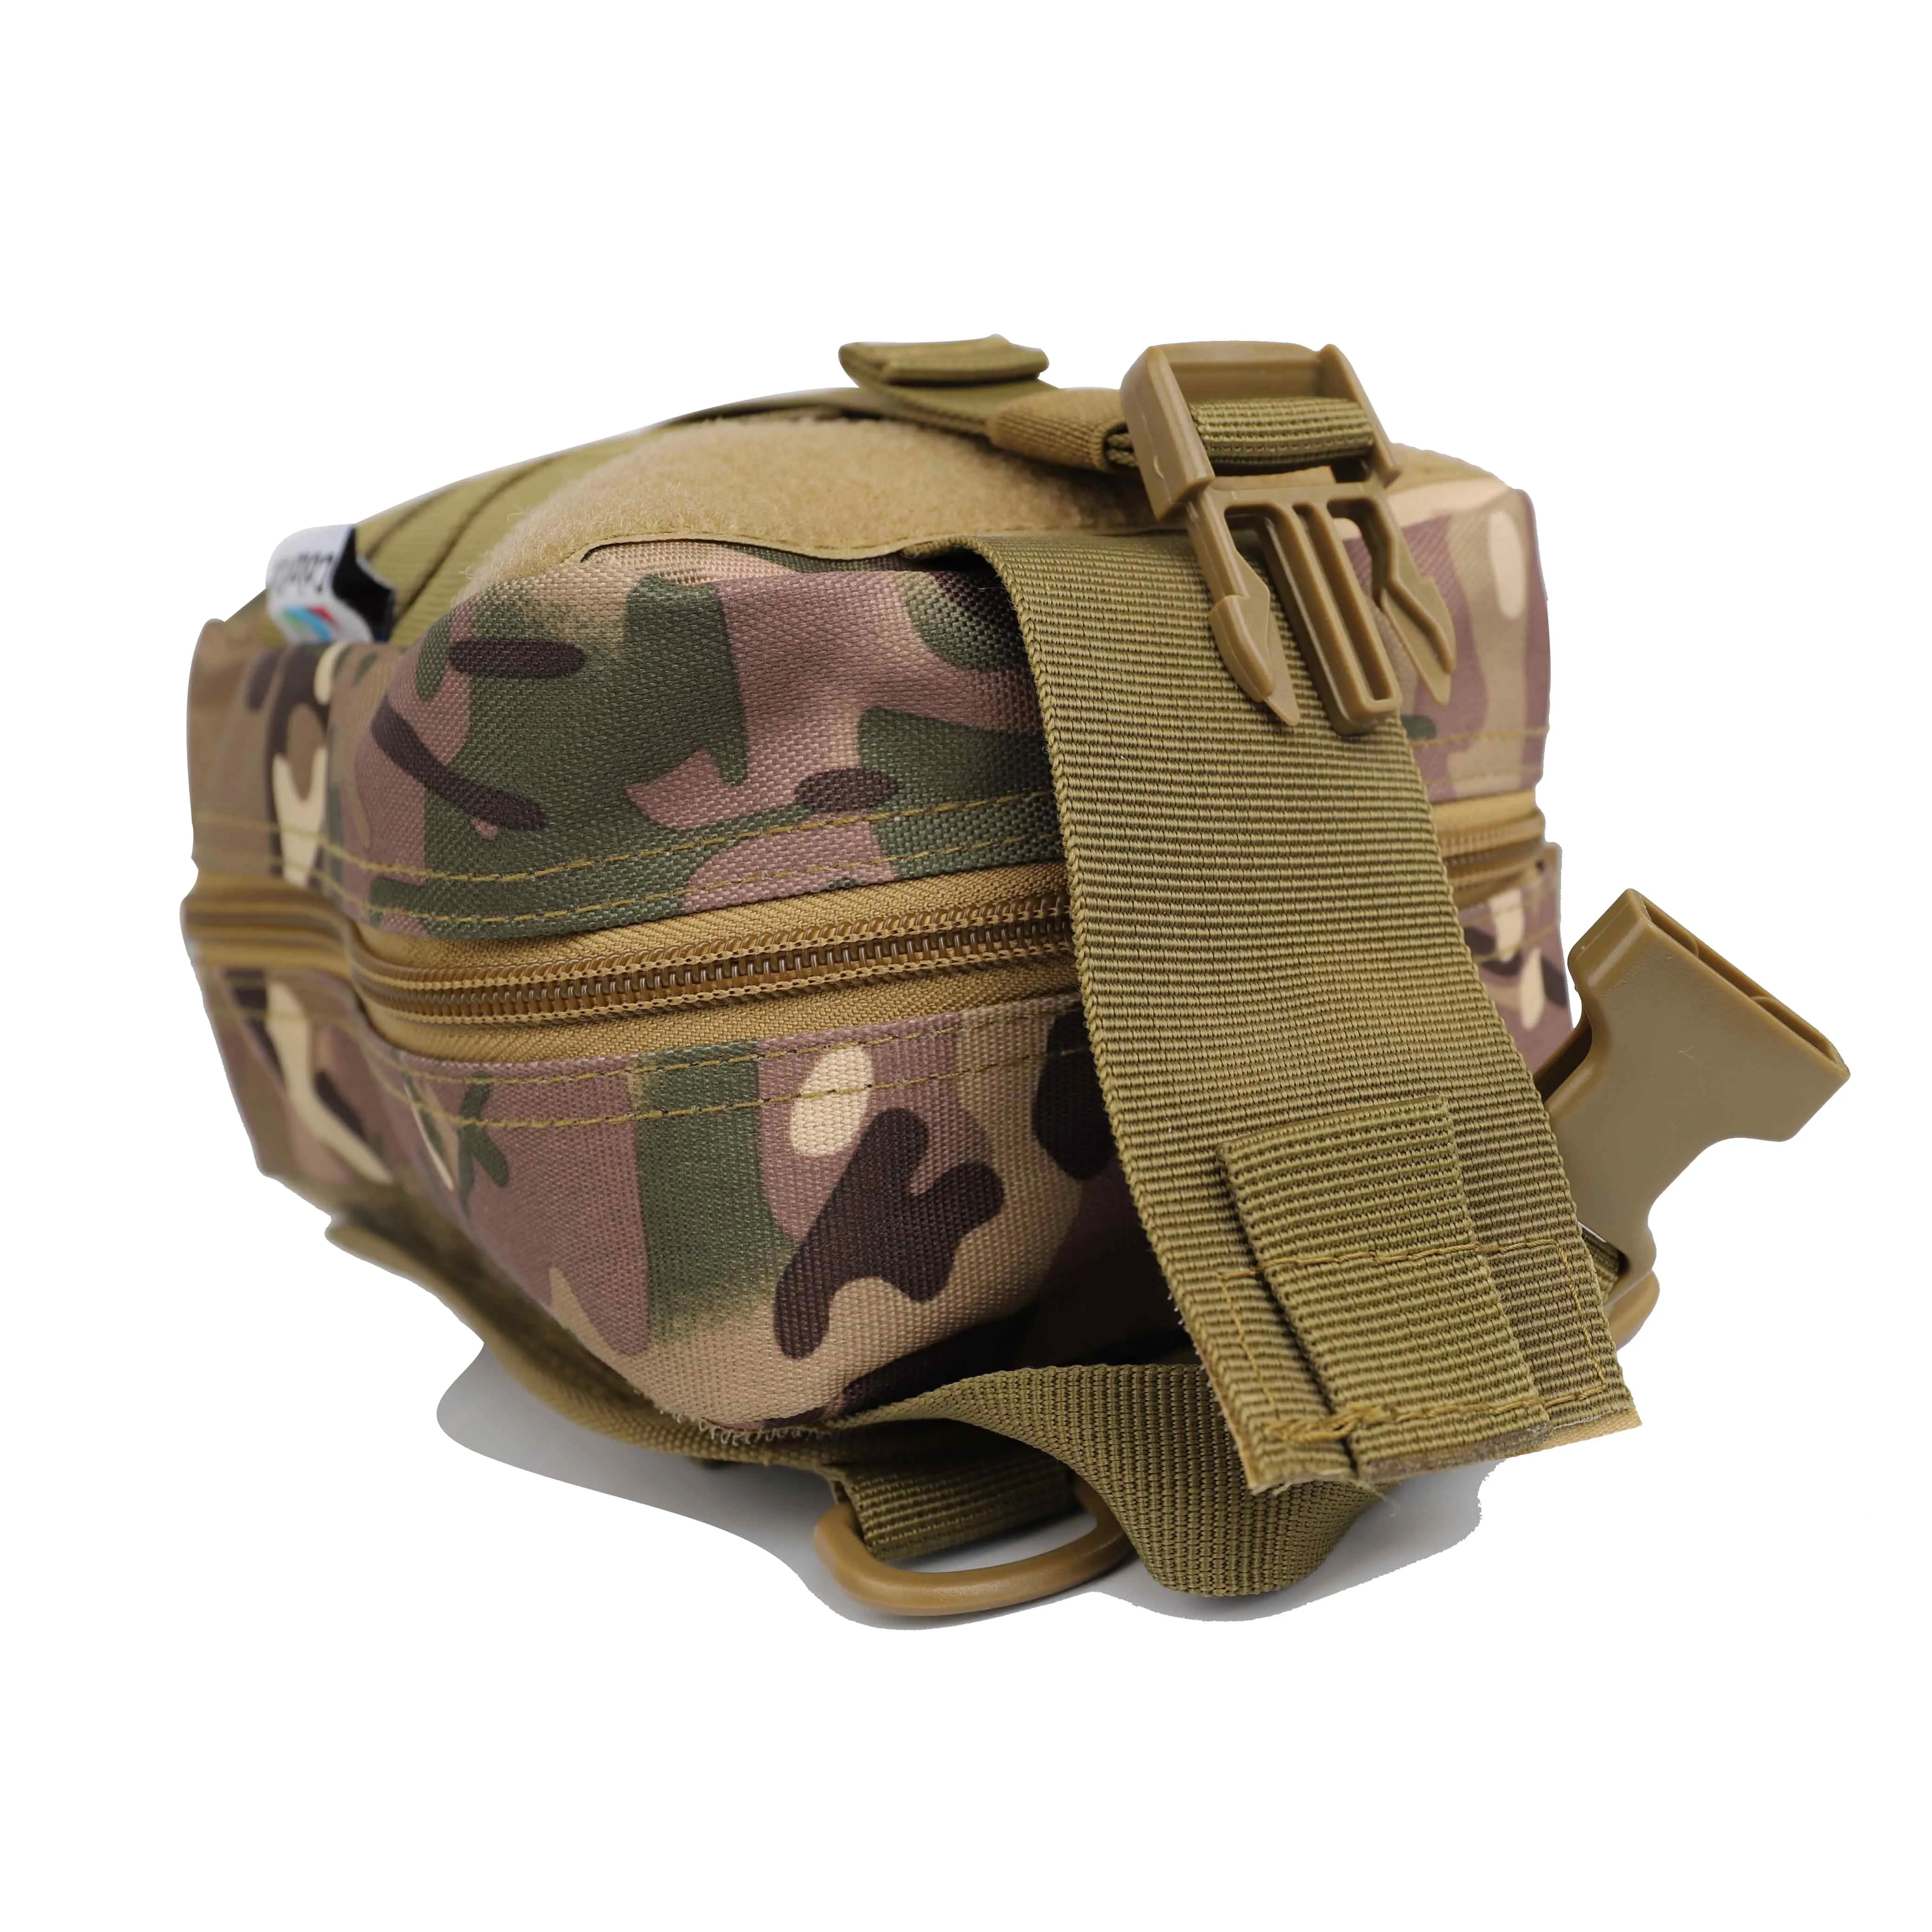 Iso Military Tactical First Aid Kit With Medical Supplies,Survival ...